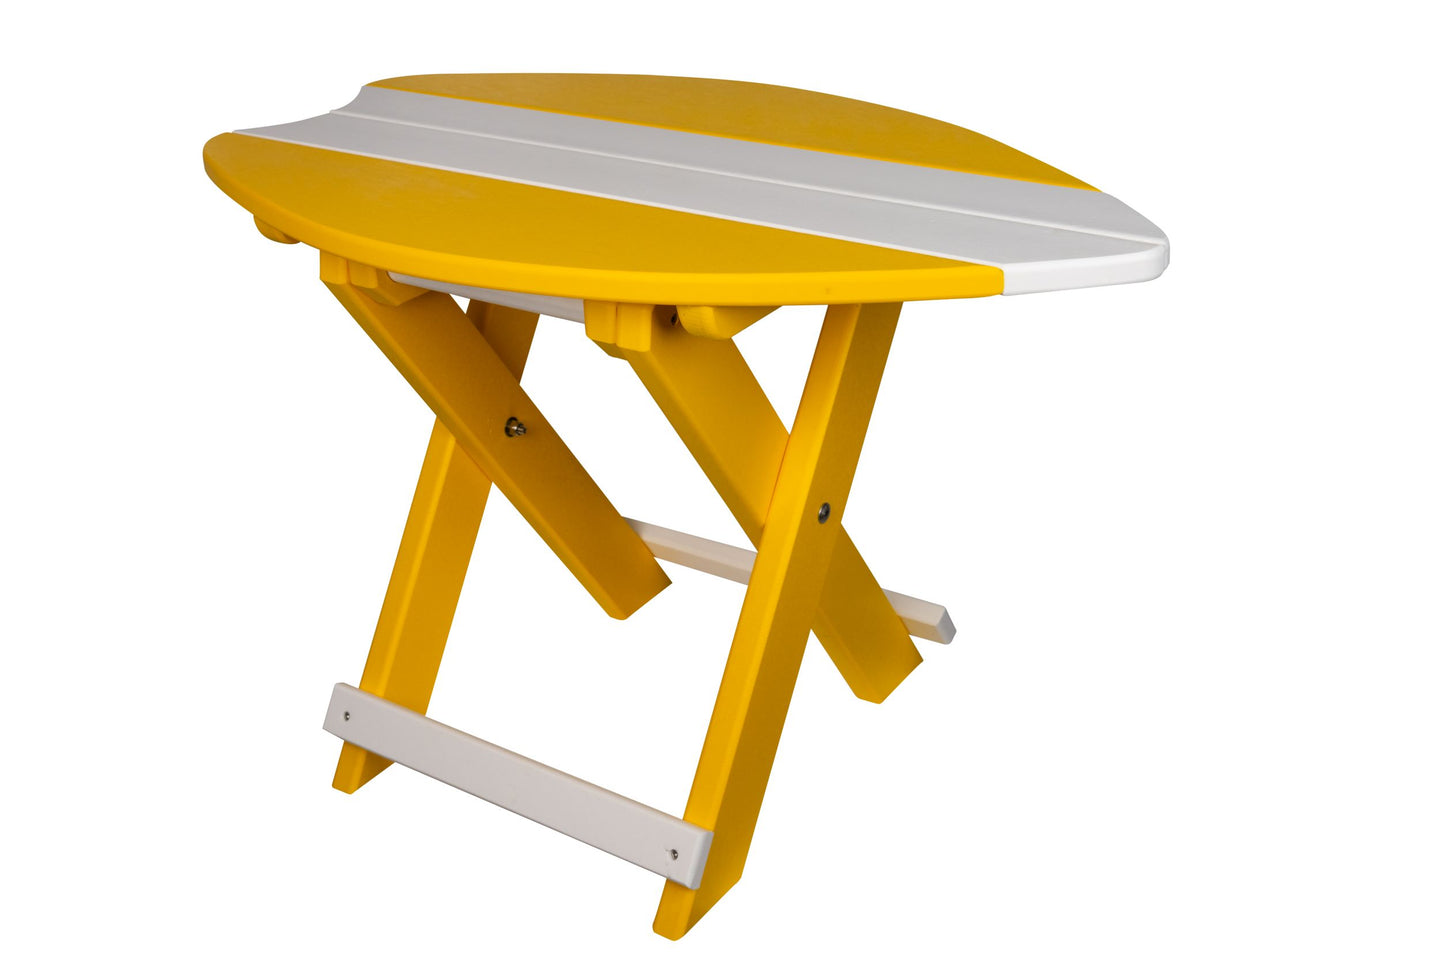 Beaver Dam Woodworks Folding Surf Tables Yellow and White